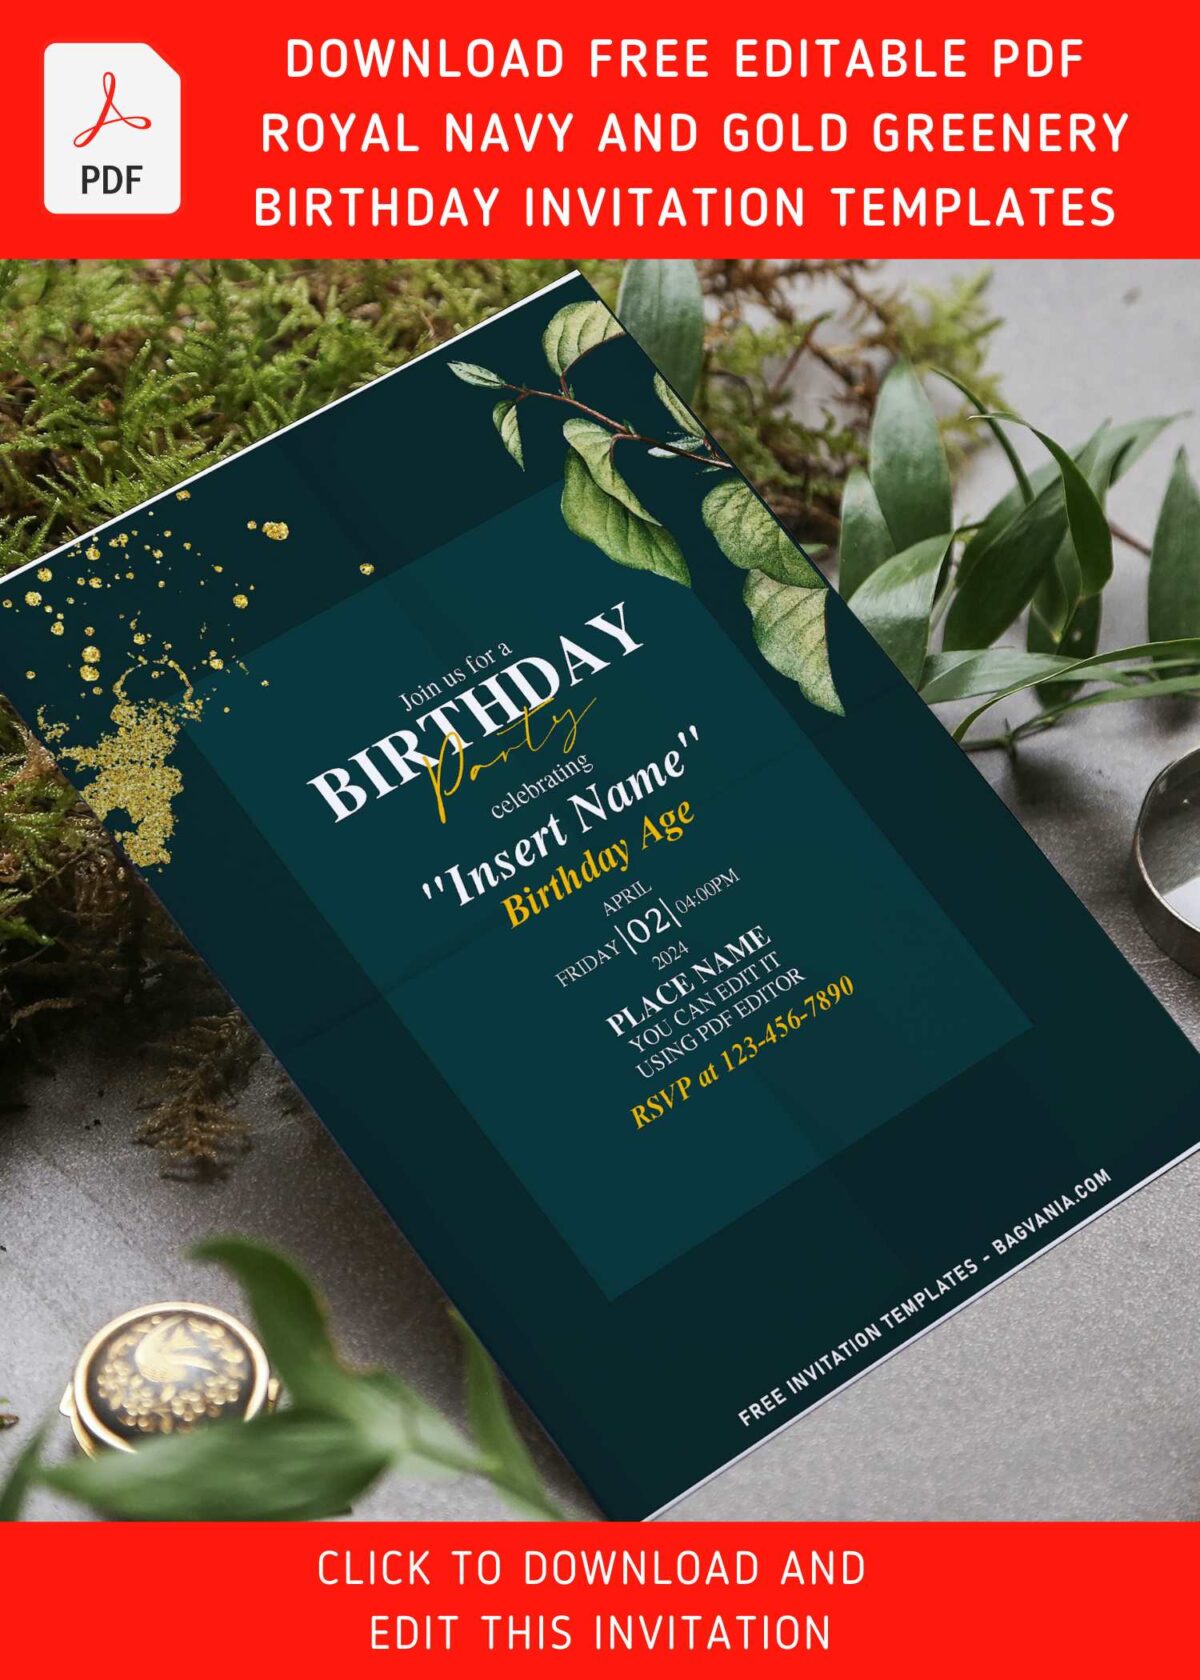 (Free Editable PDF) Royal Navy And Gold Greenery Invitation Templates with dried foliage